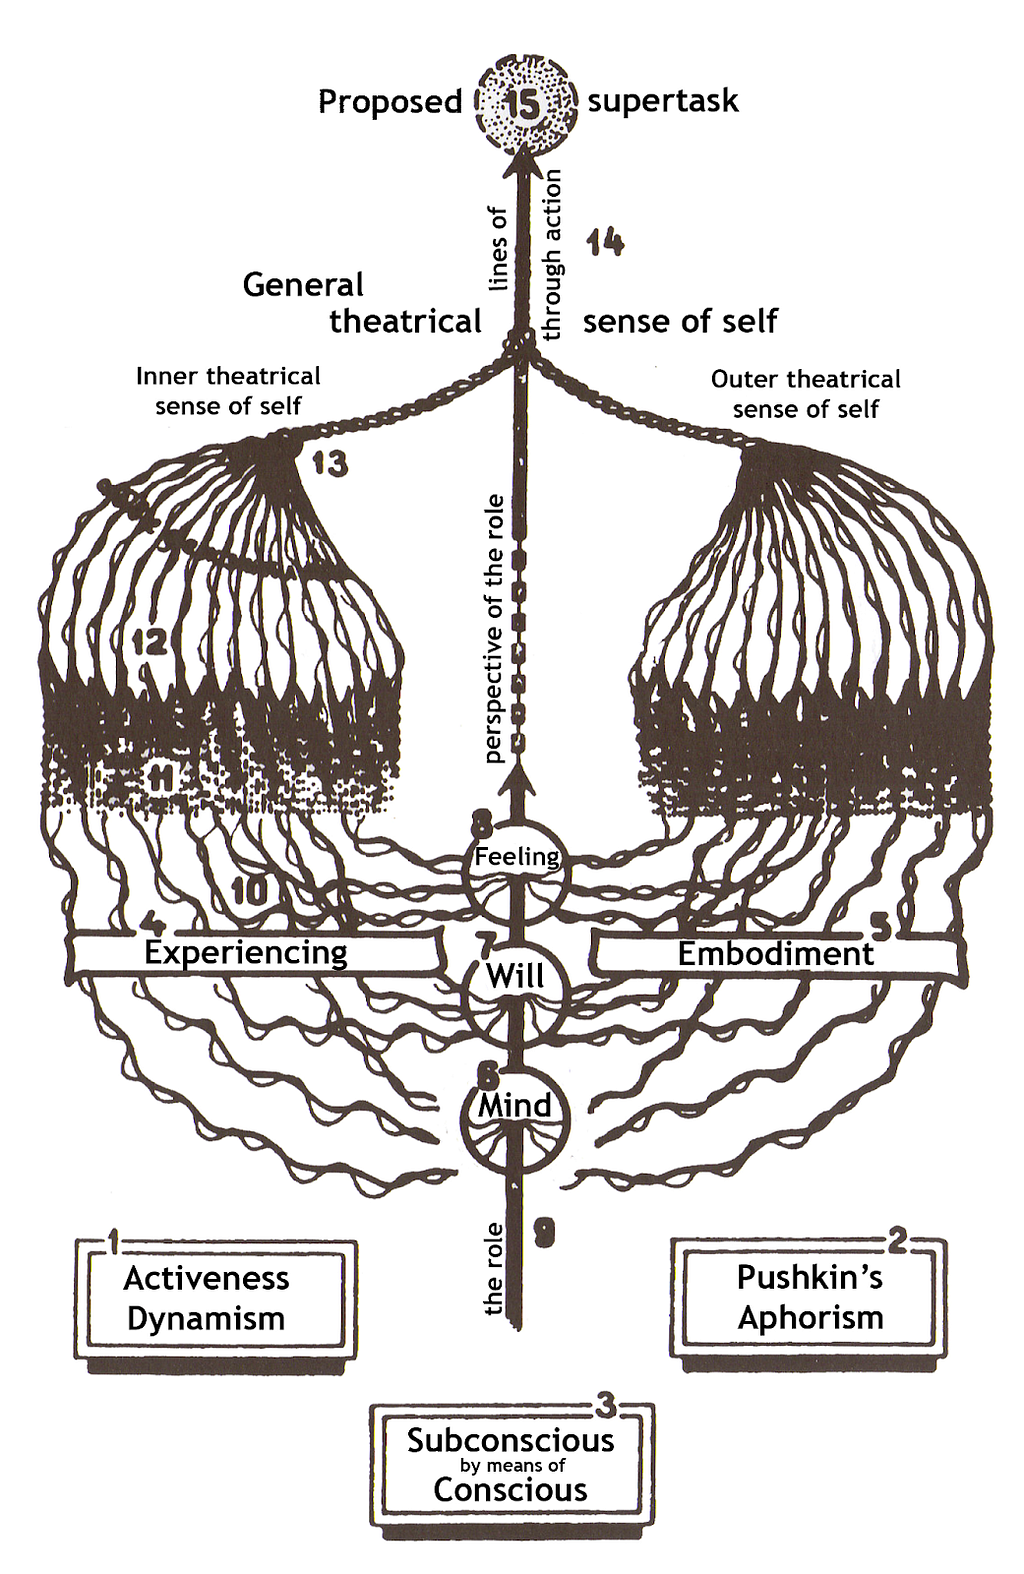 A translated diagram depicting Stanislavski’s System. Likely hand-drawn with typed words over the top. The diagram is split into 2 (left and right) that mirror eachother. The diagram is read from the bottom upwards.